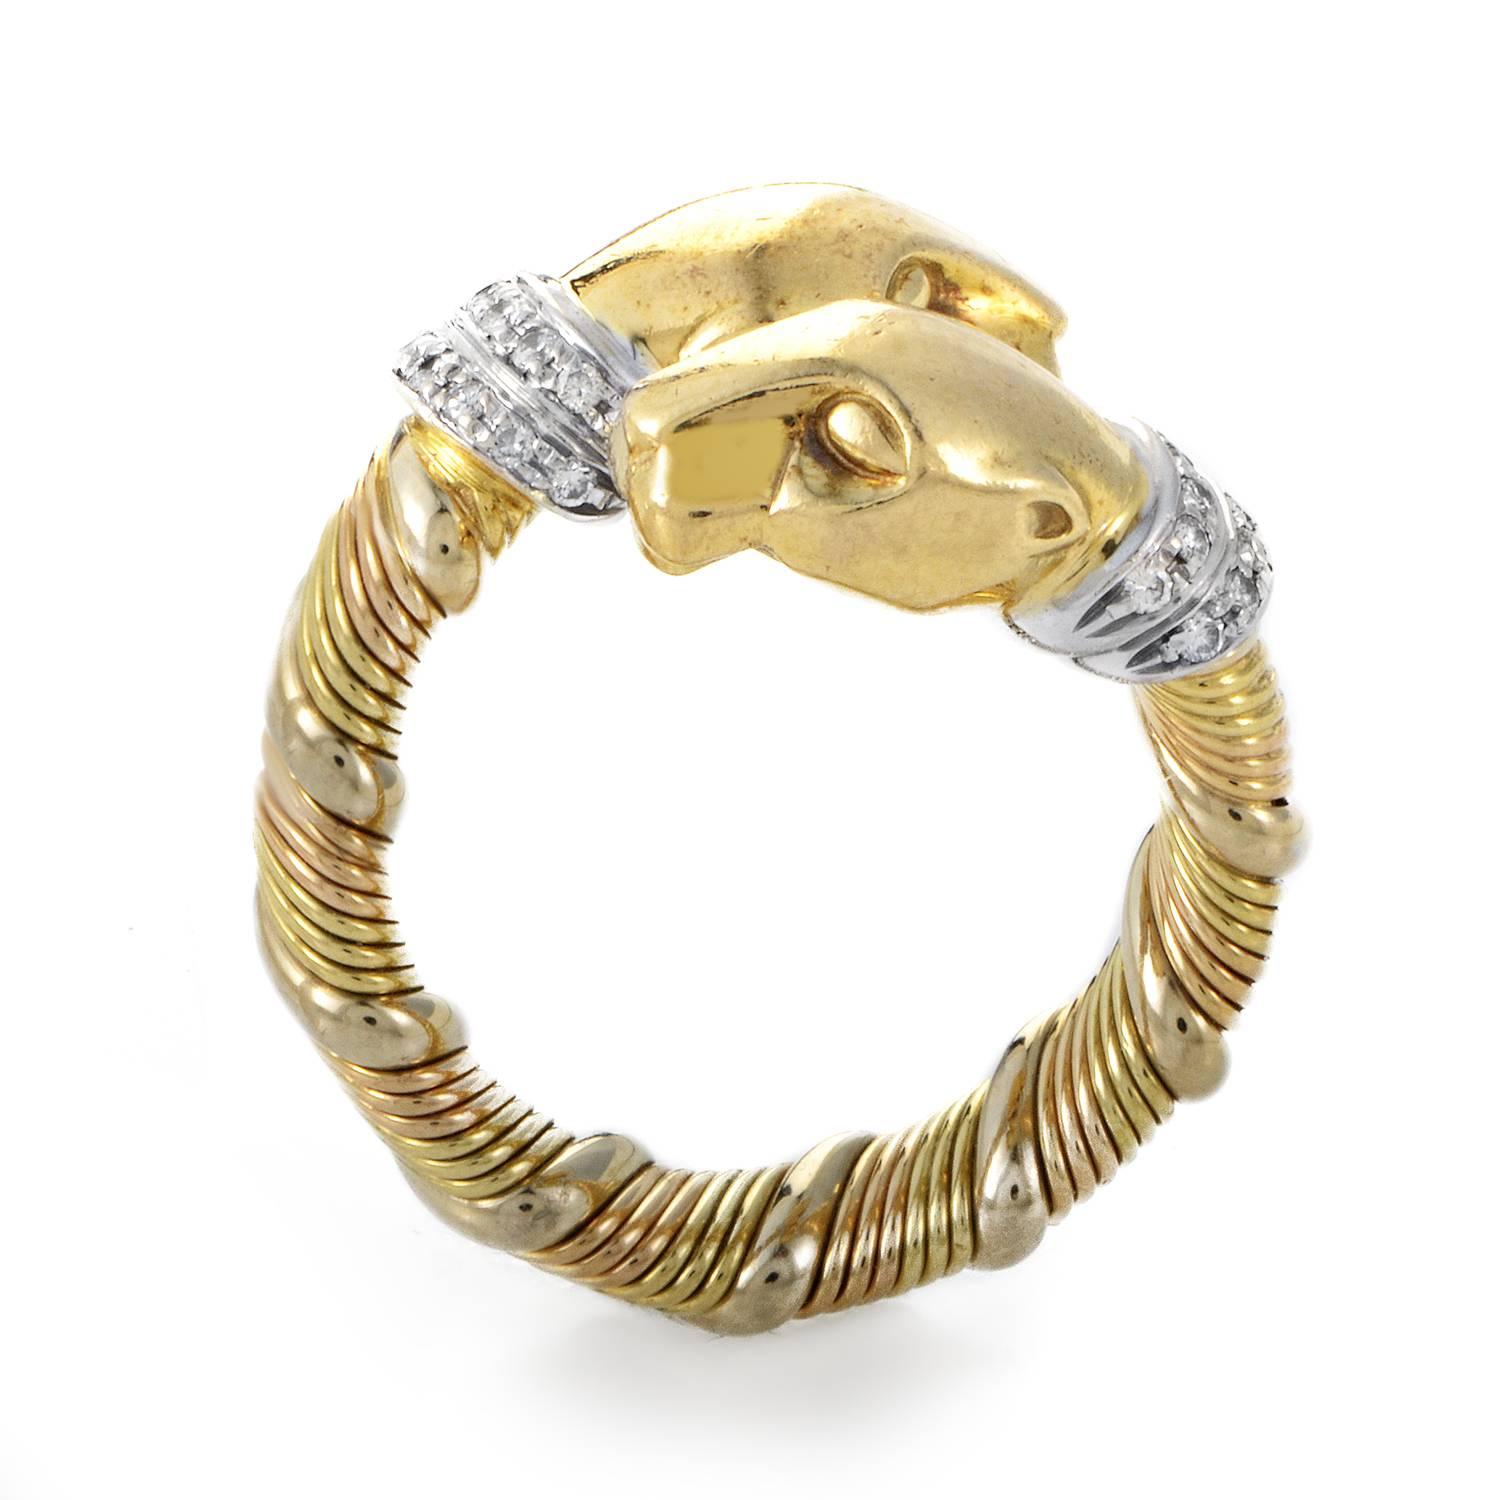 An exotic feline motif takes center stage atop this intriguing and beautifully crafted ring from Cartier. The band rises in a textured coil, its twining reach combining 18K Yellow and Rose Gold. At its zenith two panther heads nuzzle, their snouts